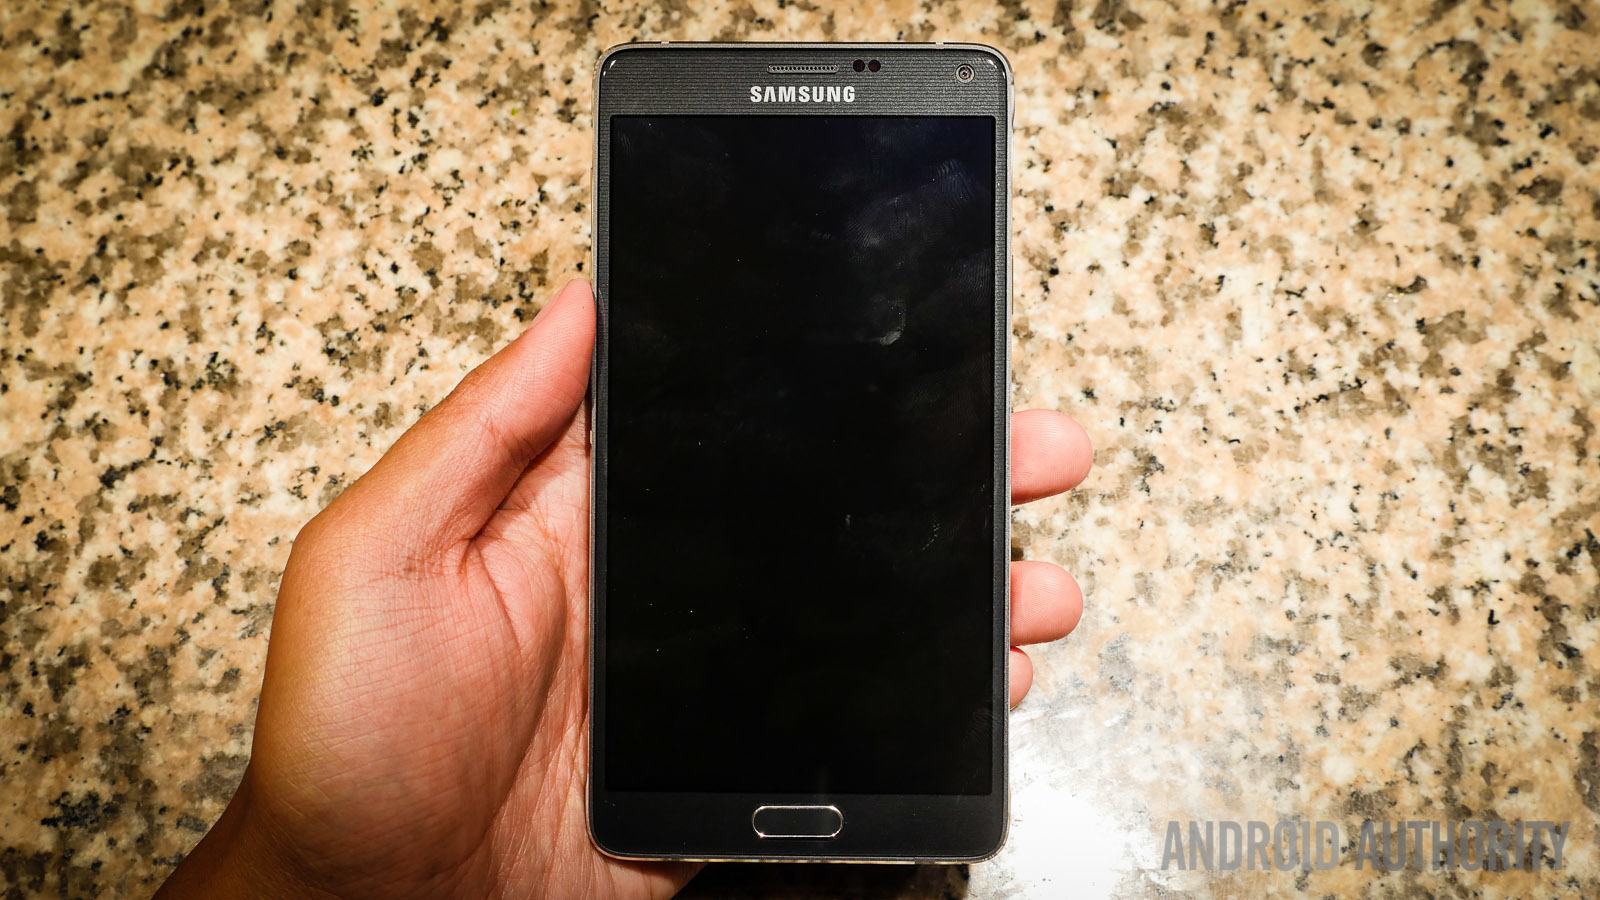 samsung galaxy note 4 first impressions (6 of 20)